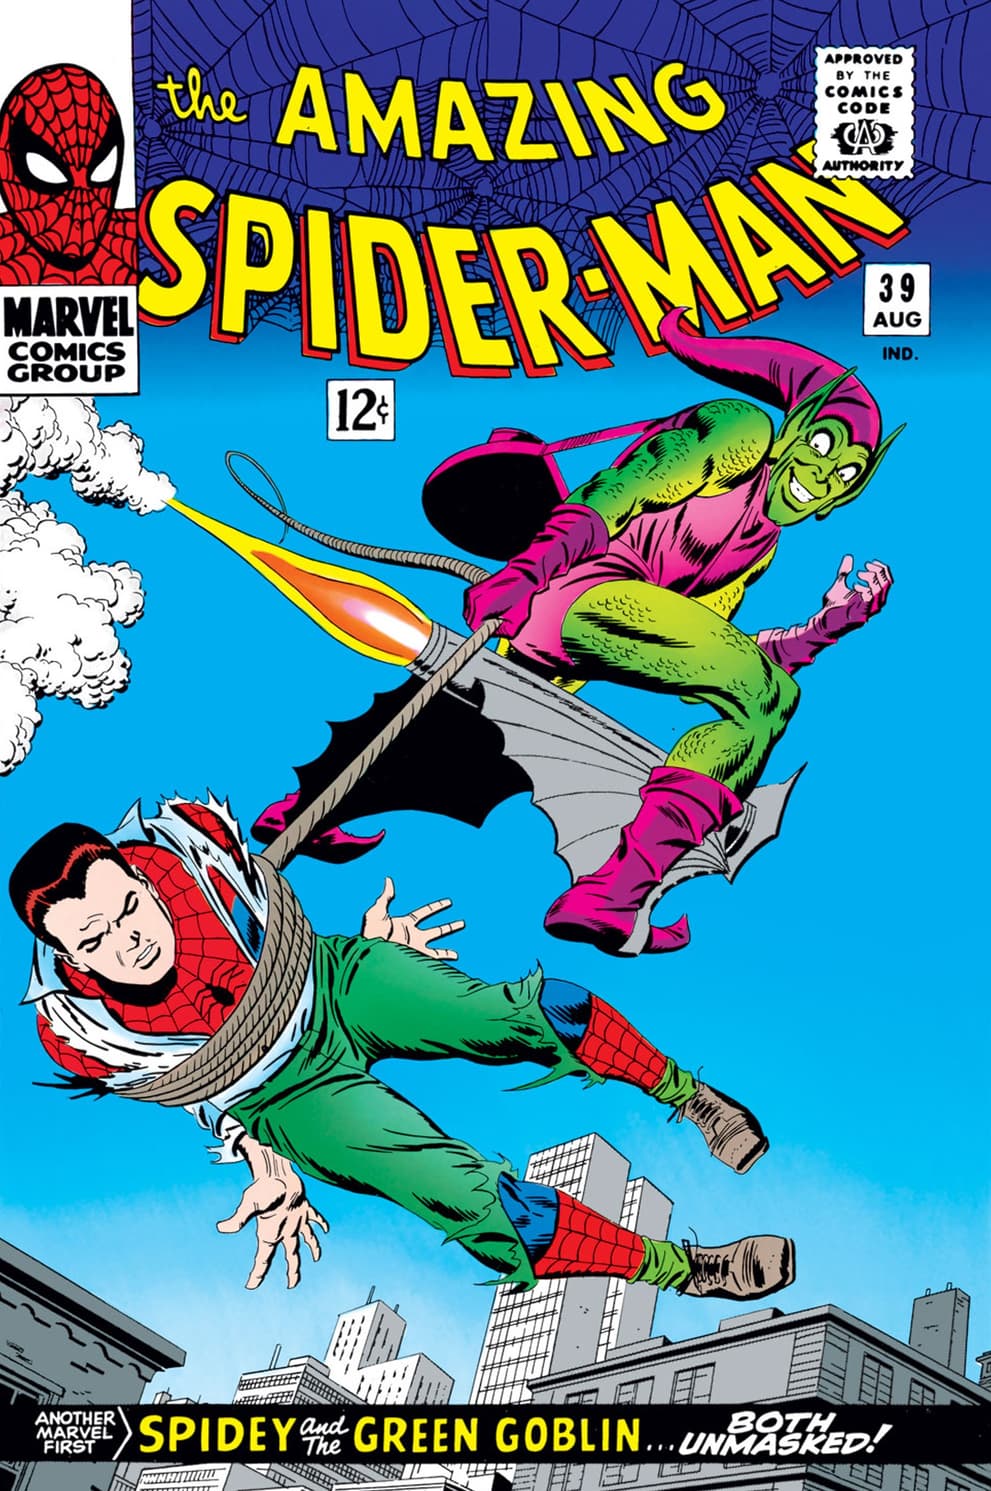 AMAZING SPIDER-MAN (1963) #39 cover by John Romita Sr. and Mike Esposito